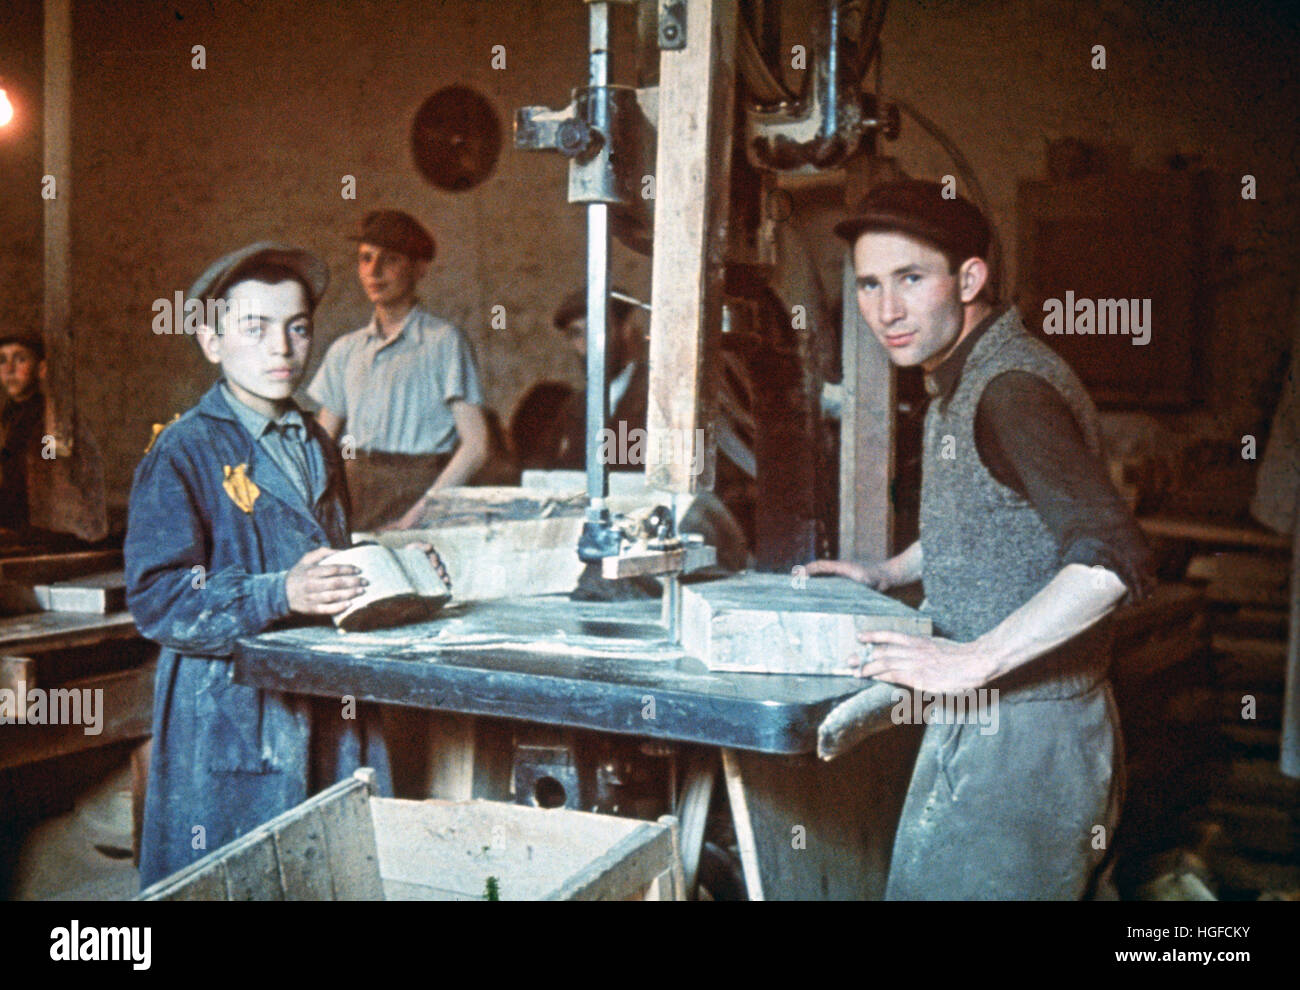 Ghetto Lodz, Litzmannstadt, Young Jewish workers in the joinery of the ghetto, Poland 1942, World War II, Stock Photo